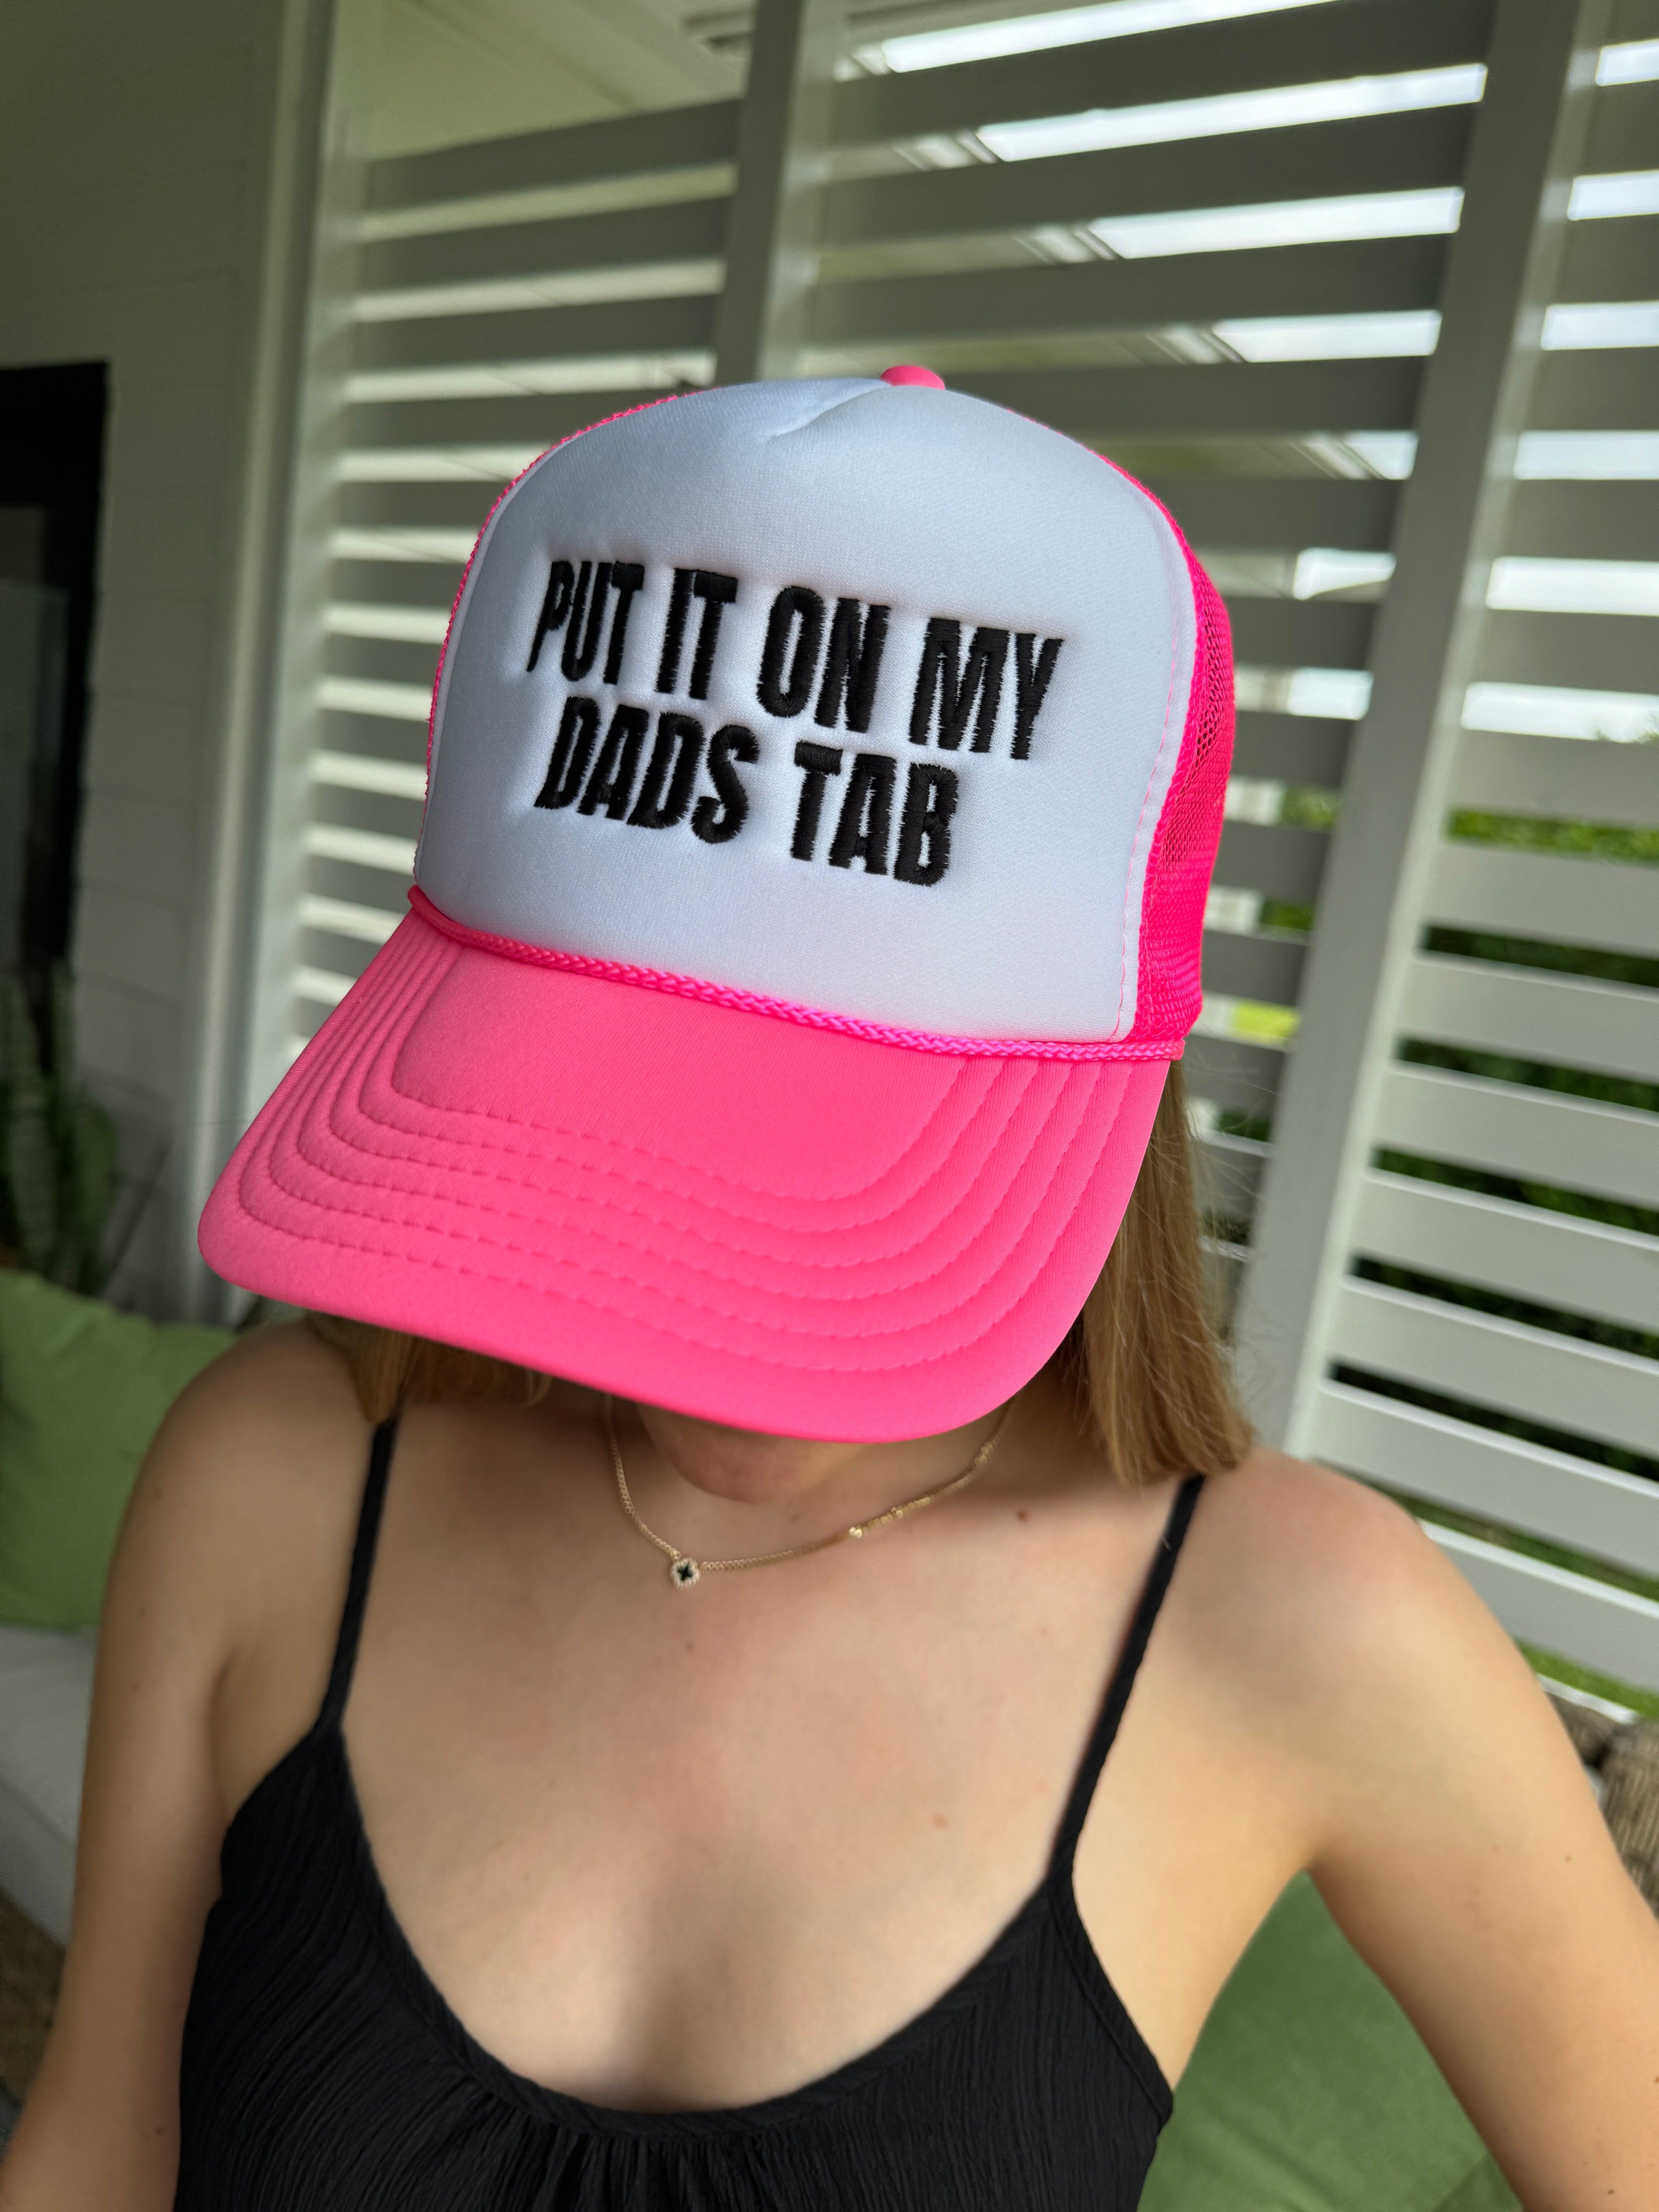 PUT IT ON MY DADS TAB Hat